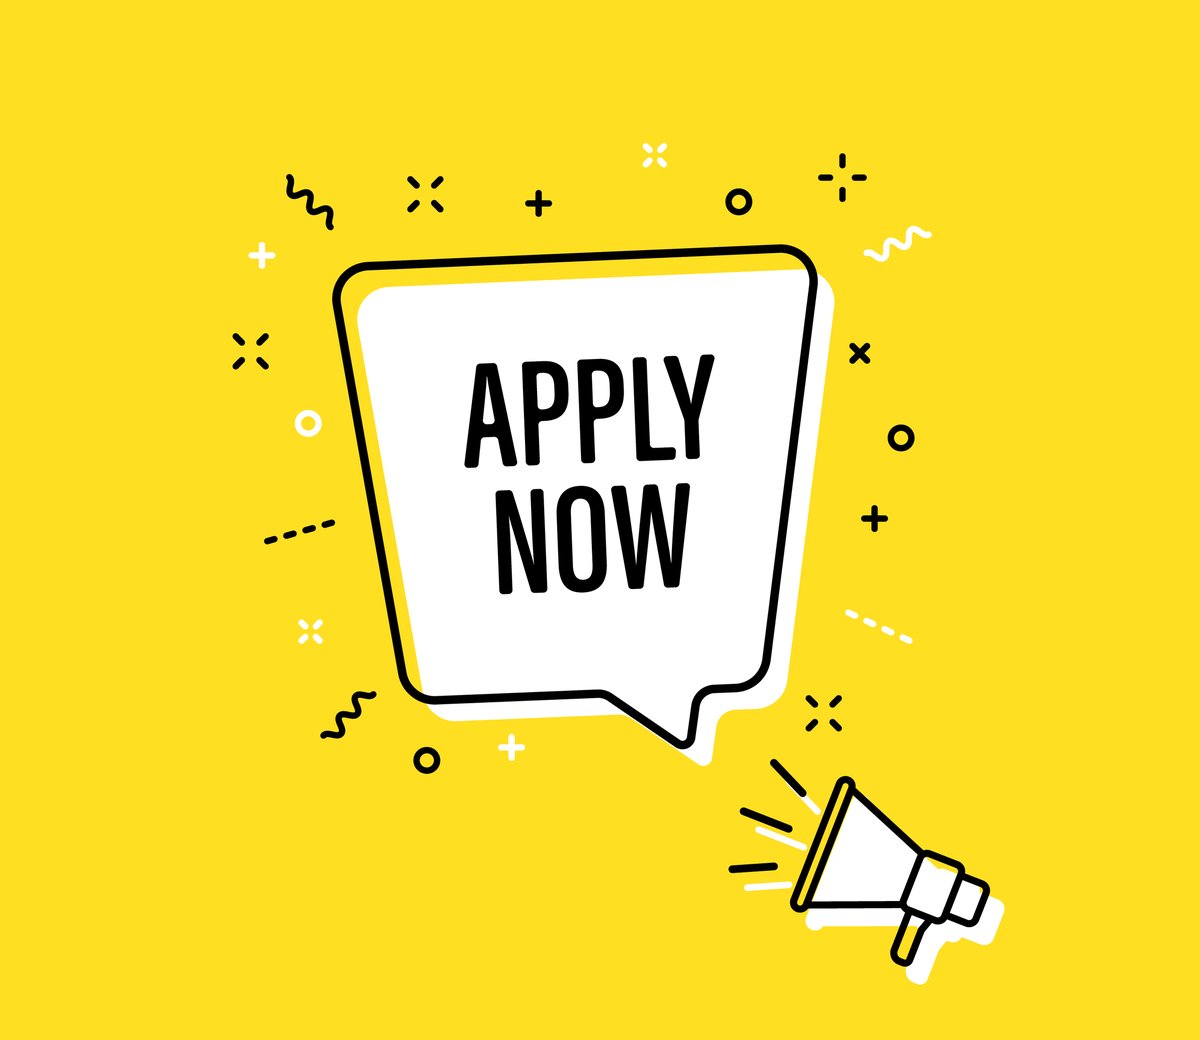 There's just over 1 week left to submit your applications for summer vacation studentships, PhD scholarships, and sponsorship towards the organisation of small events! Head to our website to find out if you're eligible. ow.ly/X2Jy50QYWgV